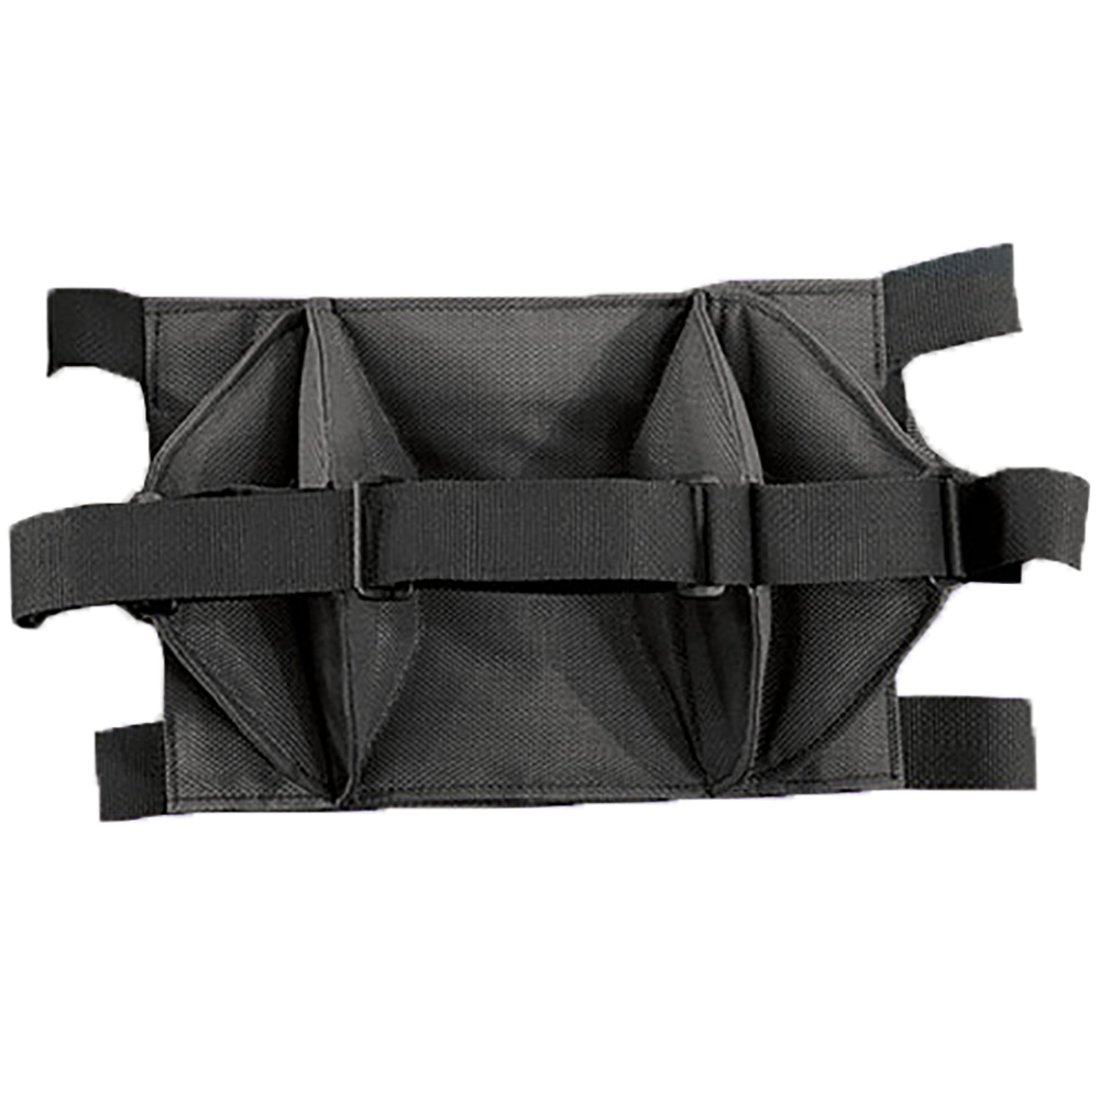 Soft_Adjustable_Lateral_Support_with_Scoliosis_Strap_1000x1000.jpg